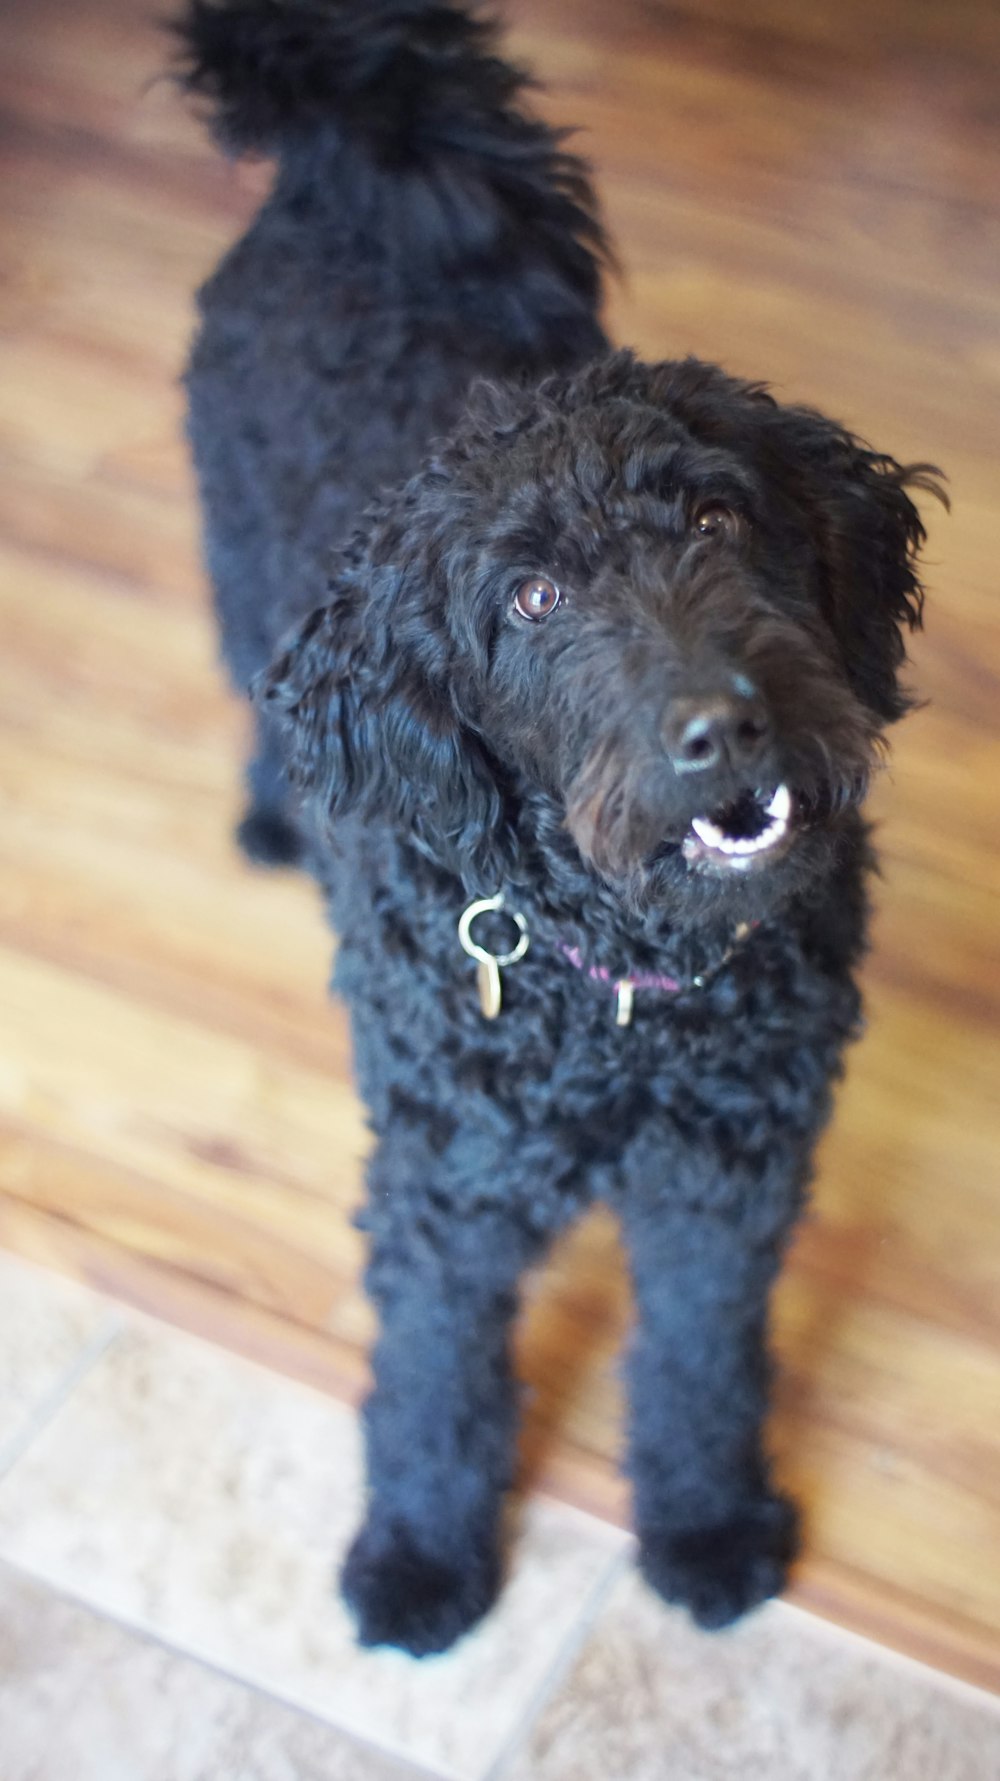 curly-haired black dog on wooden floor